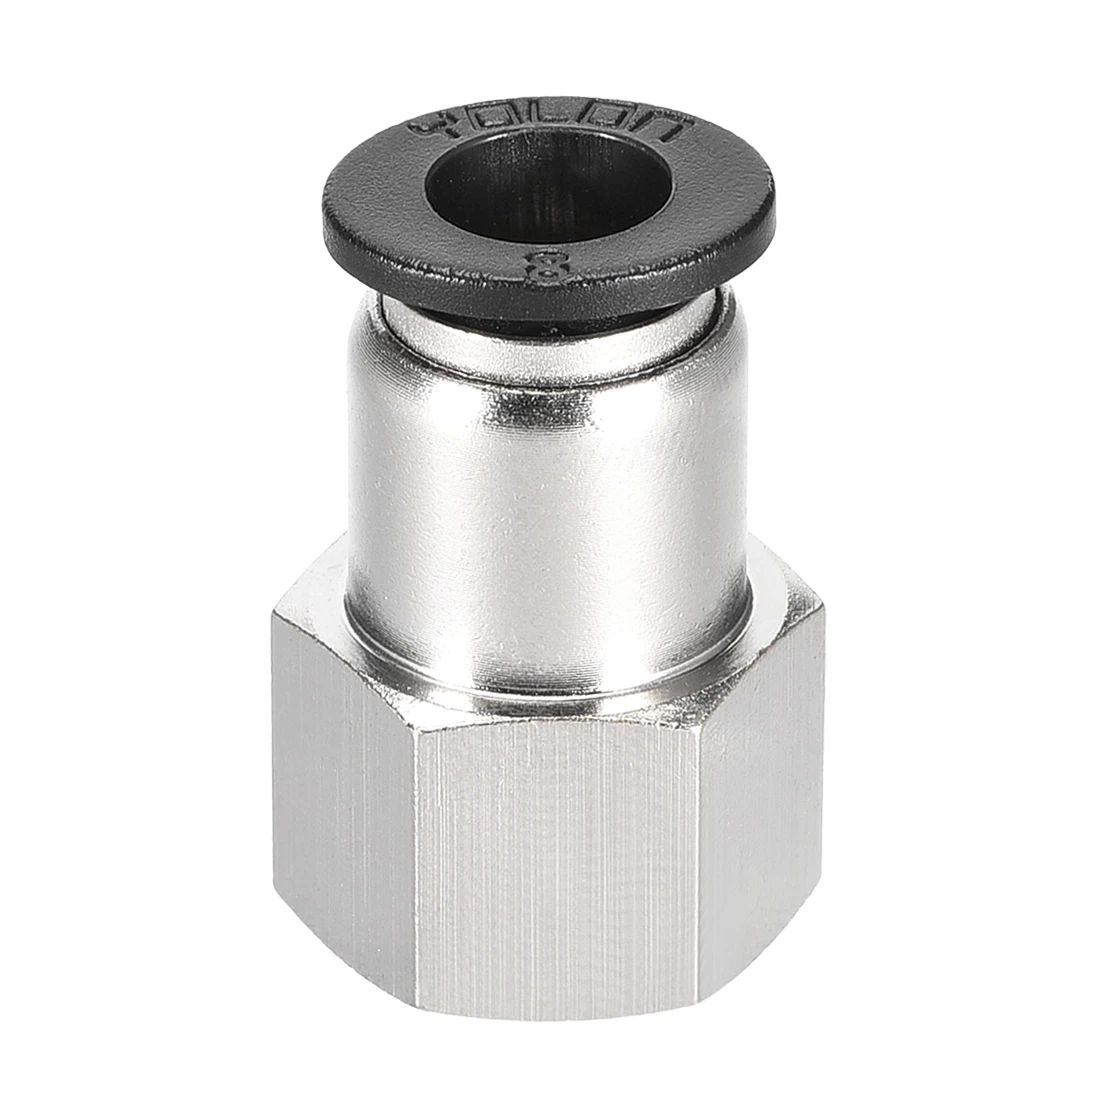 

Uxcell Push To Connect Tube Fitting Adapter 8mm Tube OD X 1/4NPT Female Straight Pneumatic Connecter Pipe Fitting